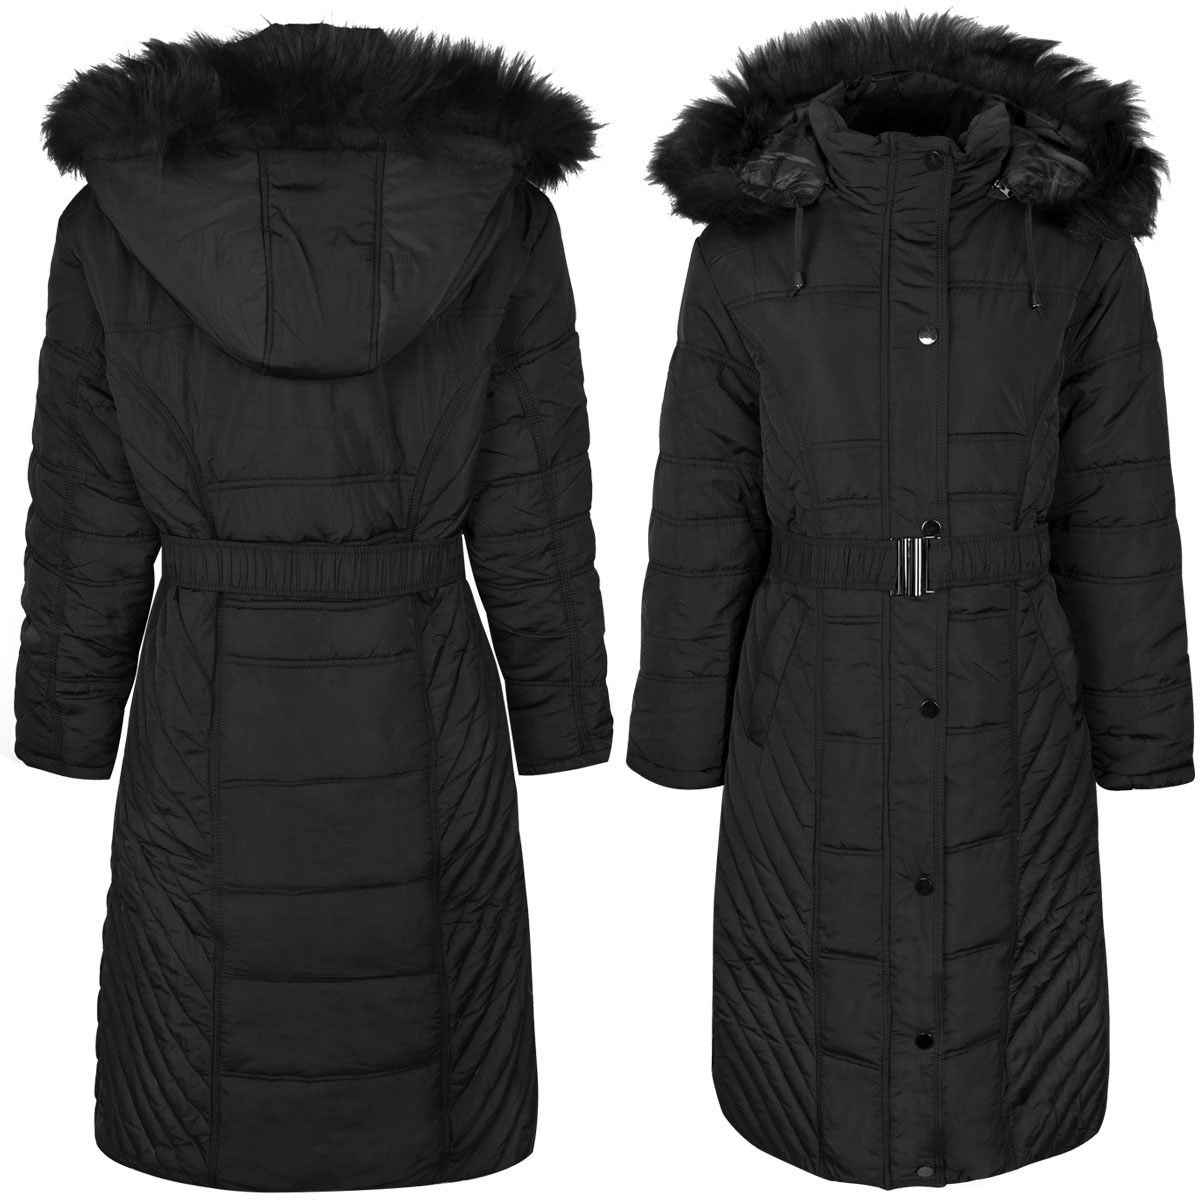 Womens Ladies Long Winter Coat Padded Quilted Puffa Jacket Fur Hooded ...